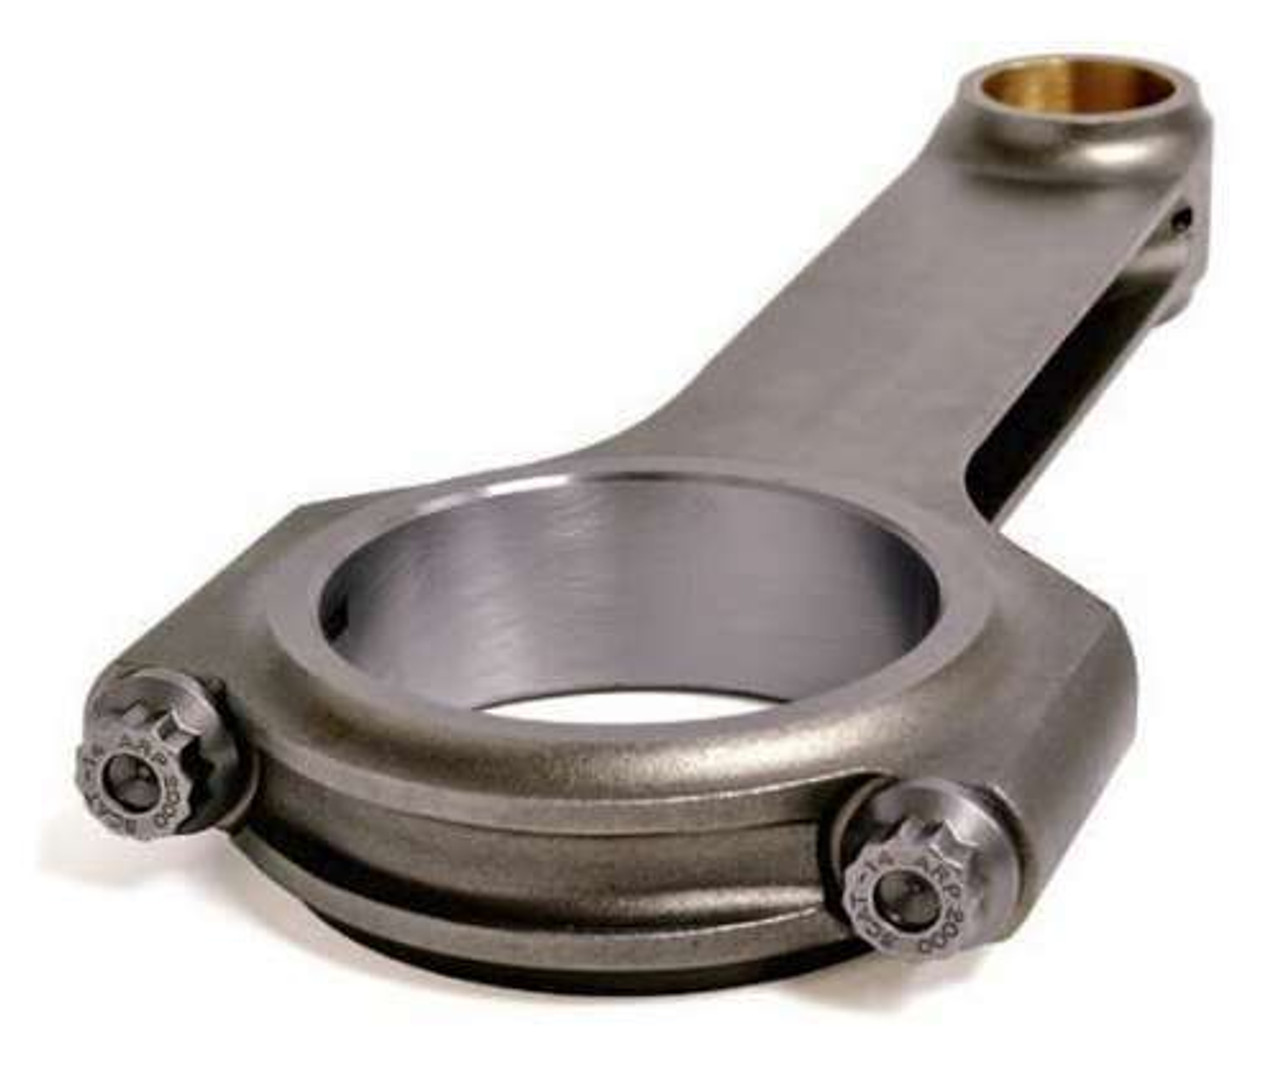 Scat Connecting Rods